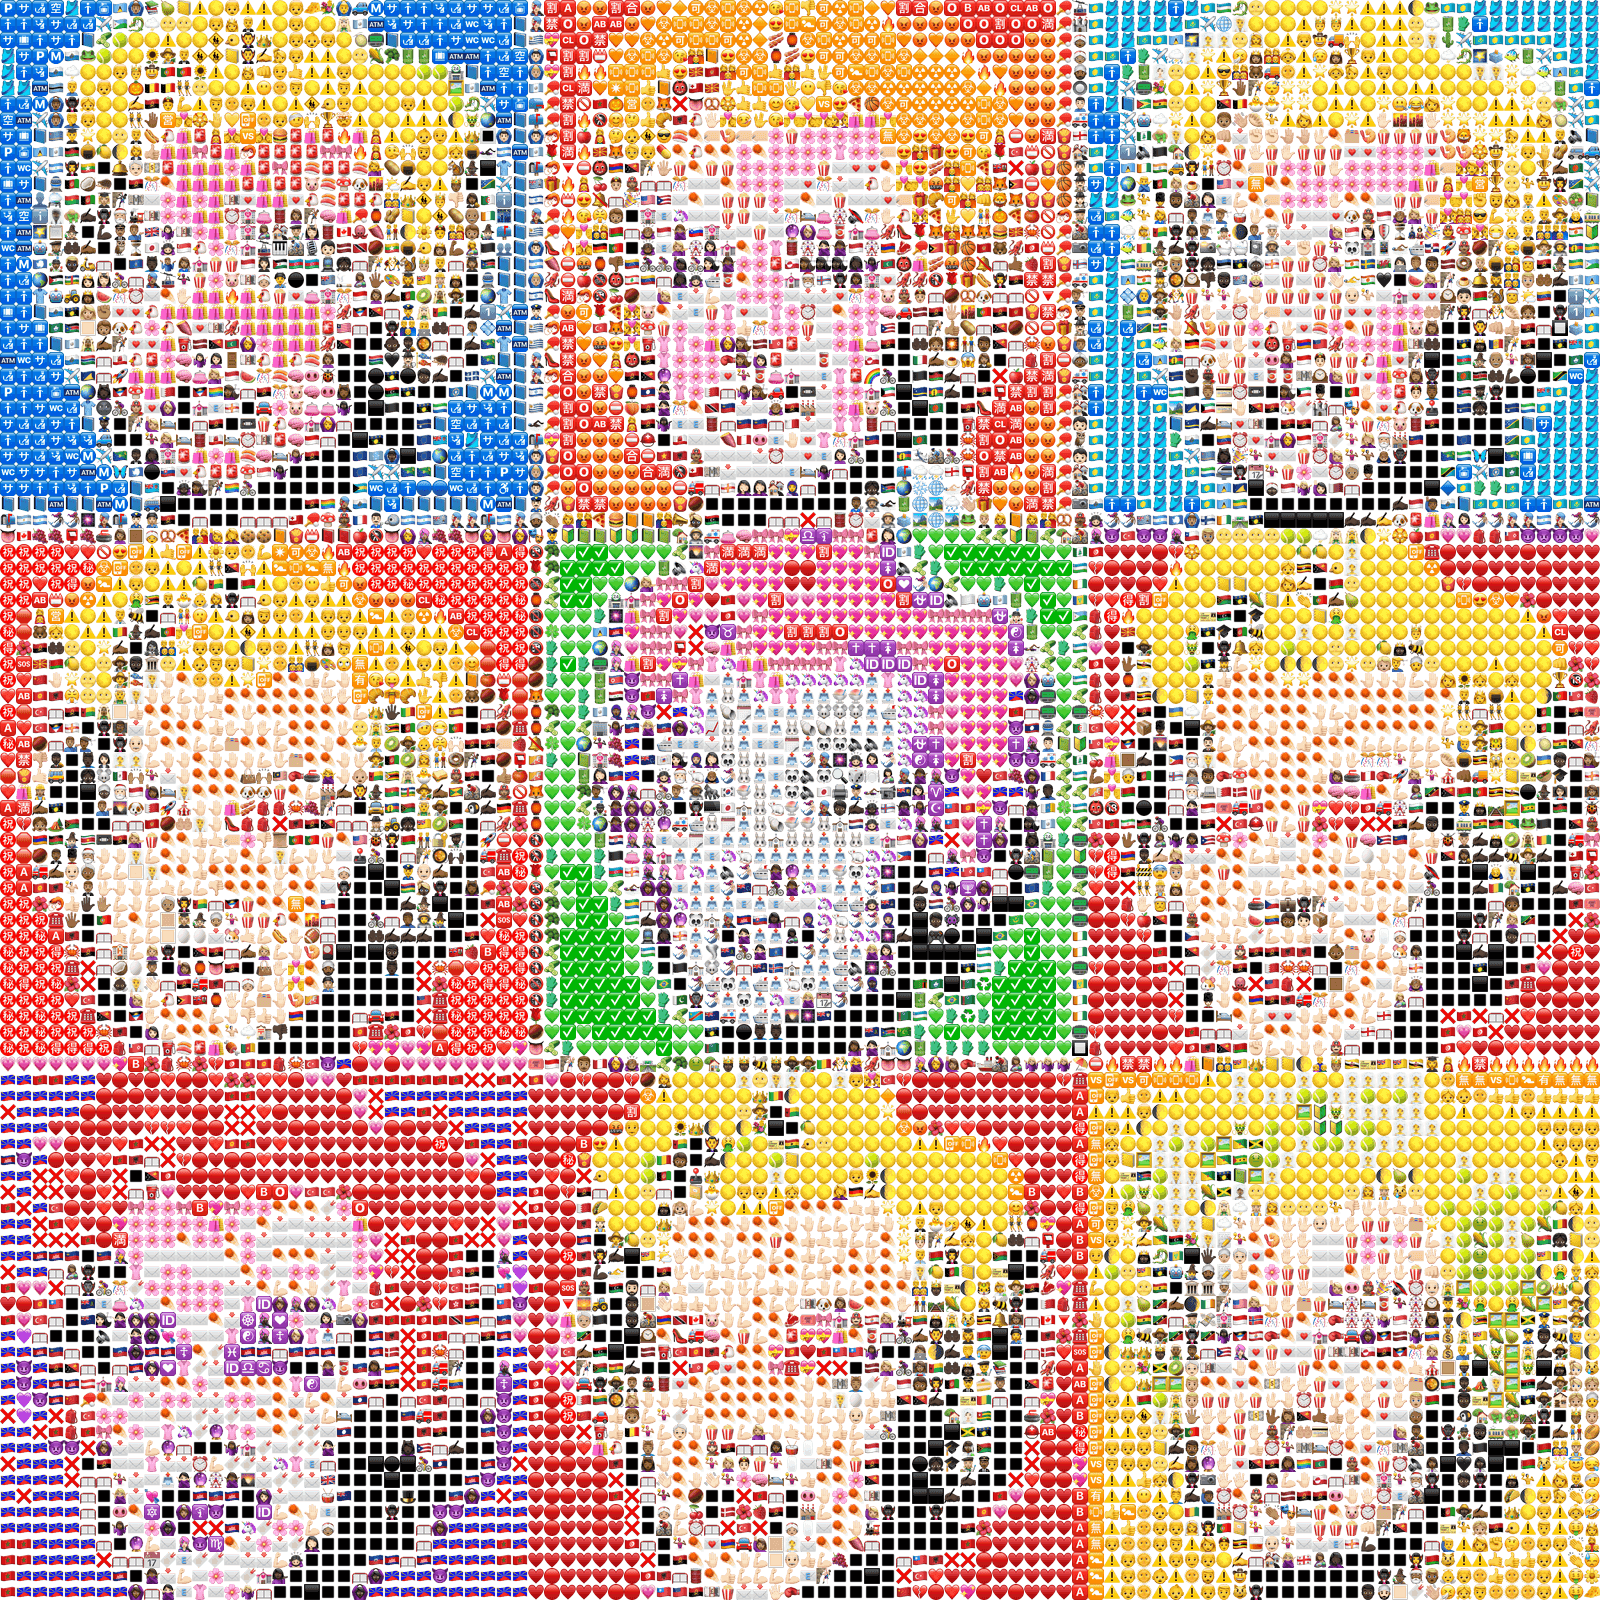 Emoji mosaic by Will Dady based on Andy Warhol’s Multiple Marilyns.